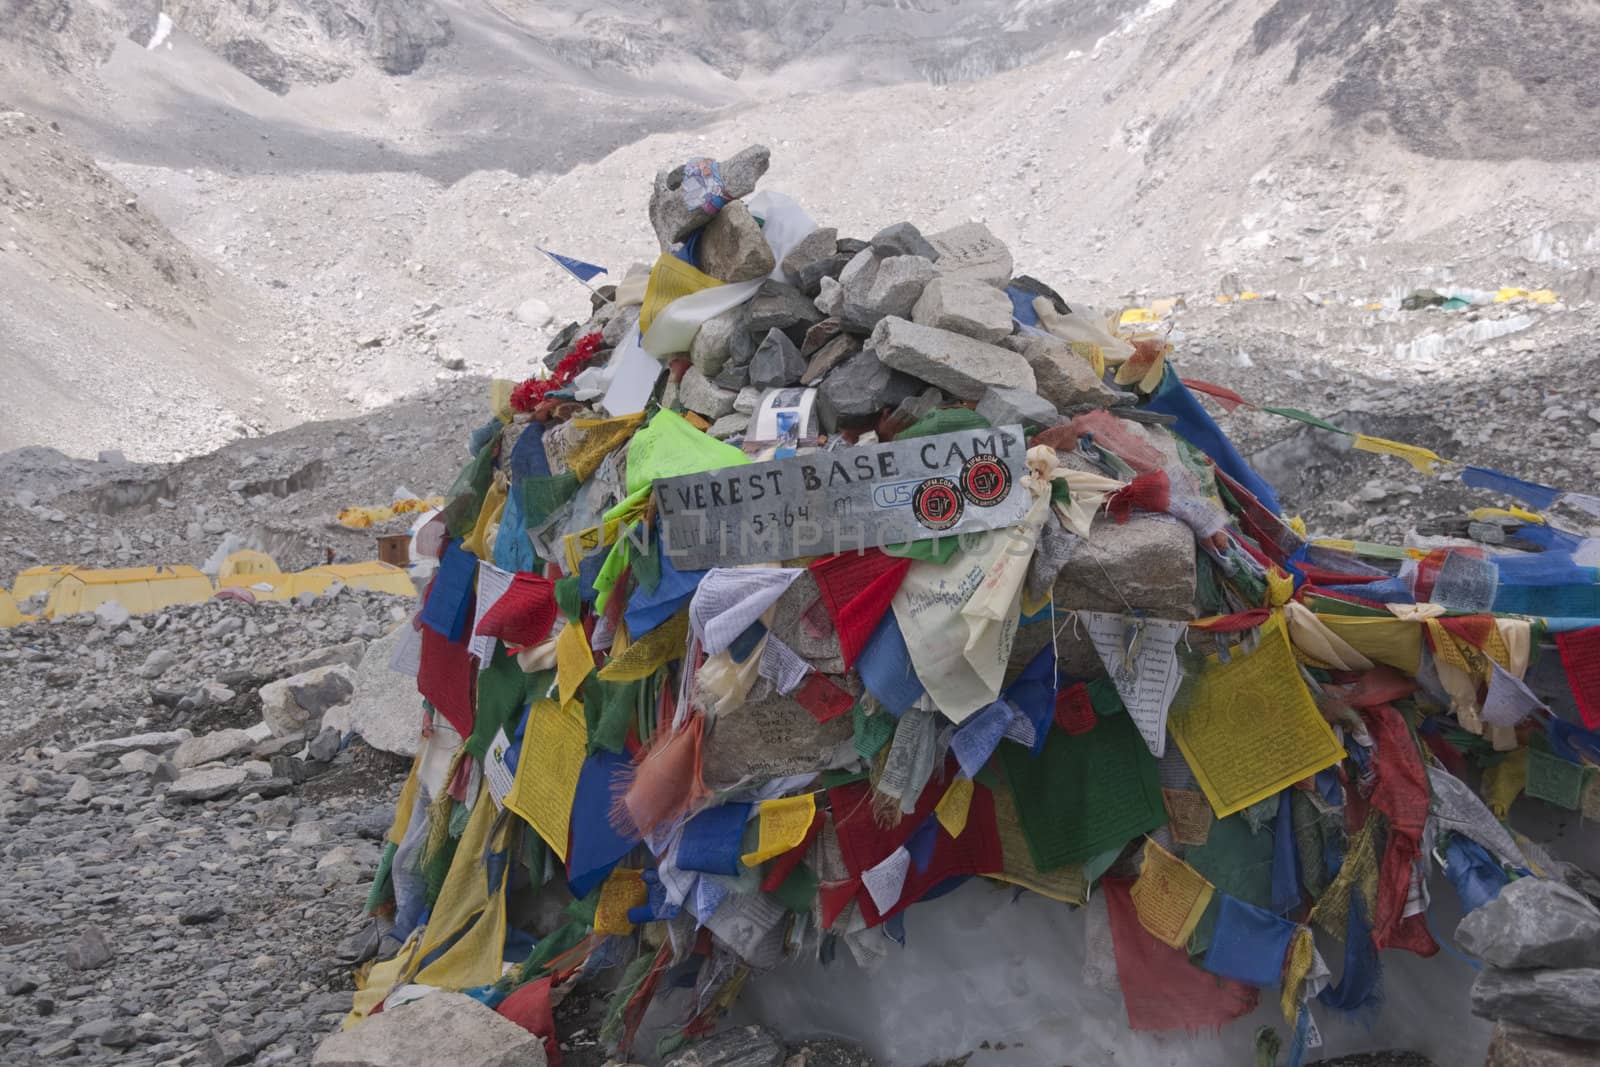 Buddhist Prayer Flags at Everest Base Camp 5364 Metre up in the Himalaya Mountains of Nepal